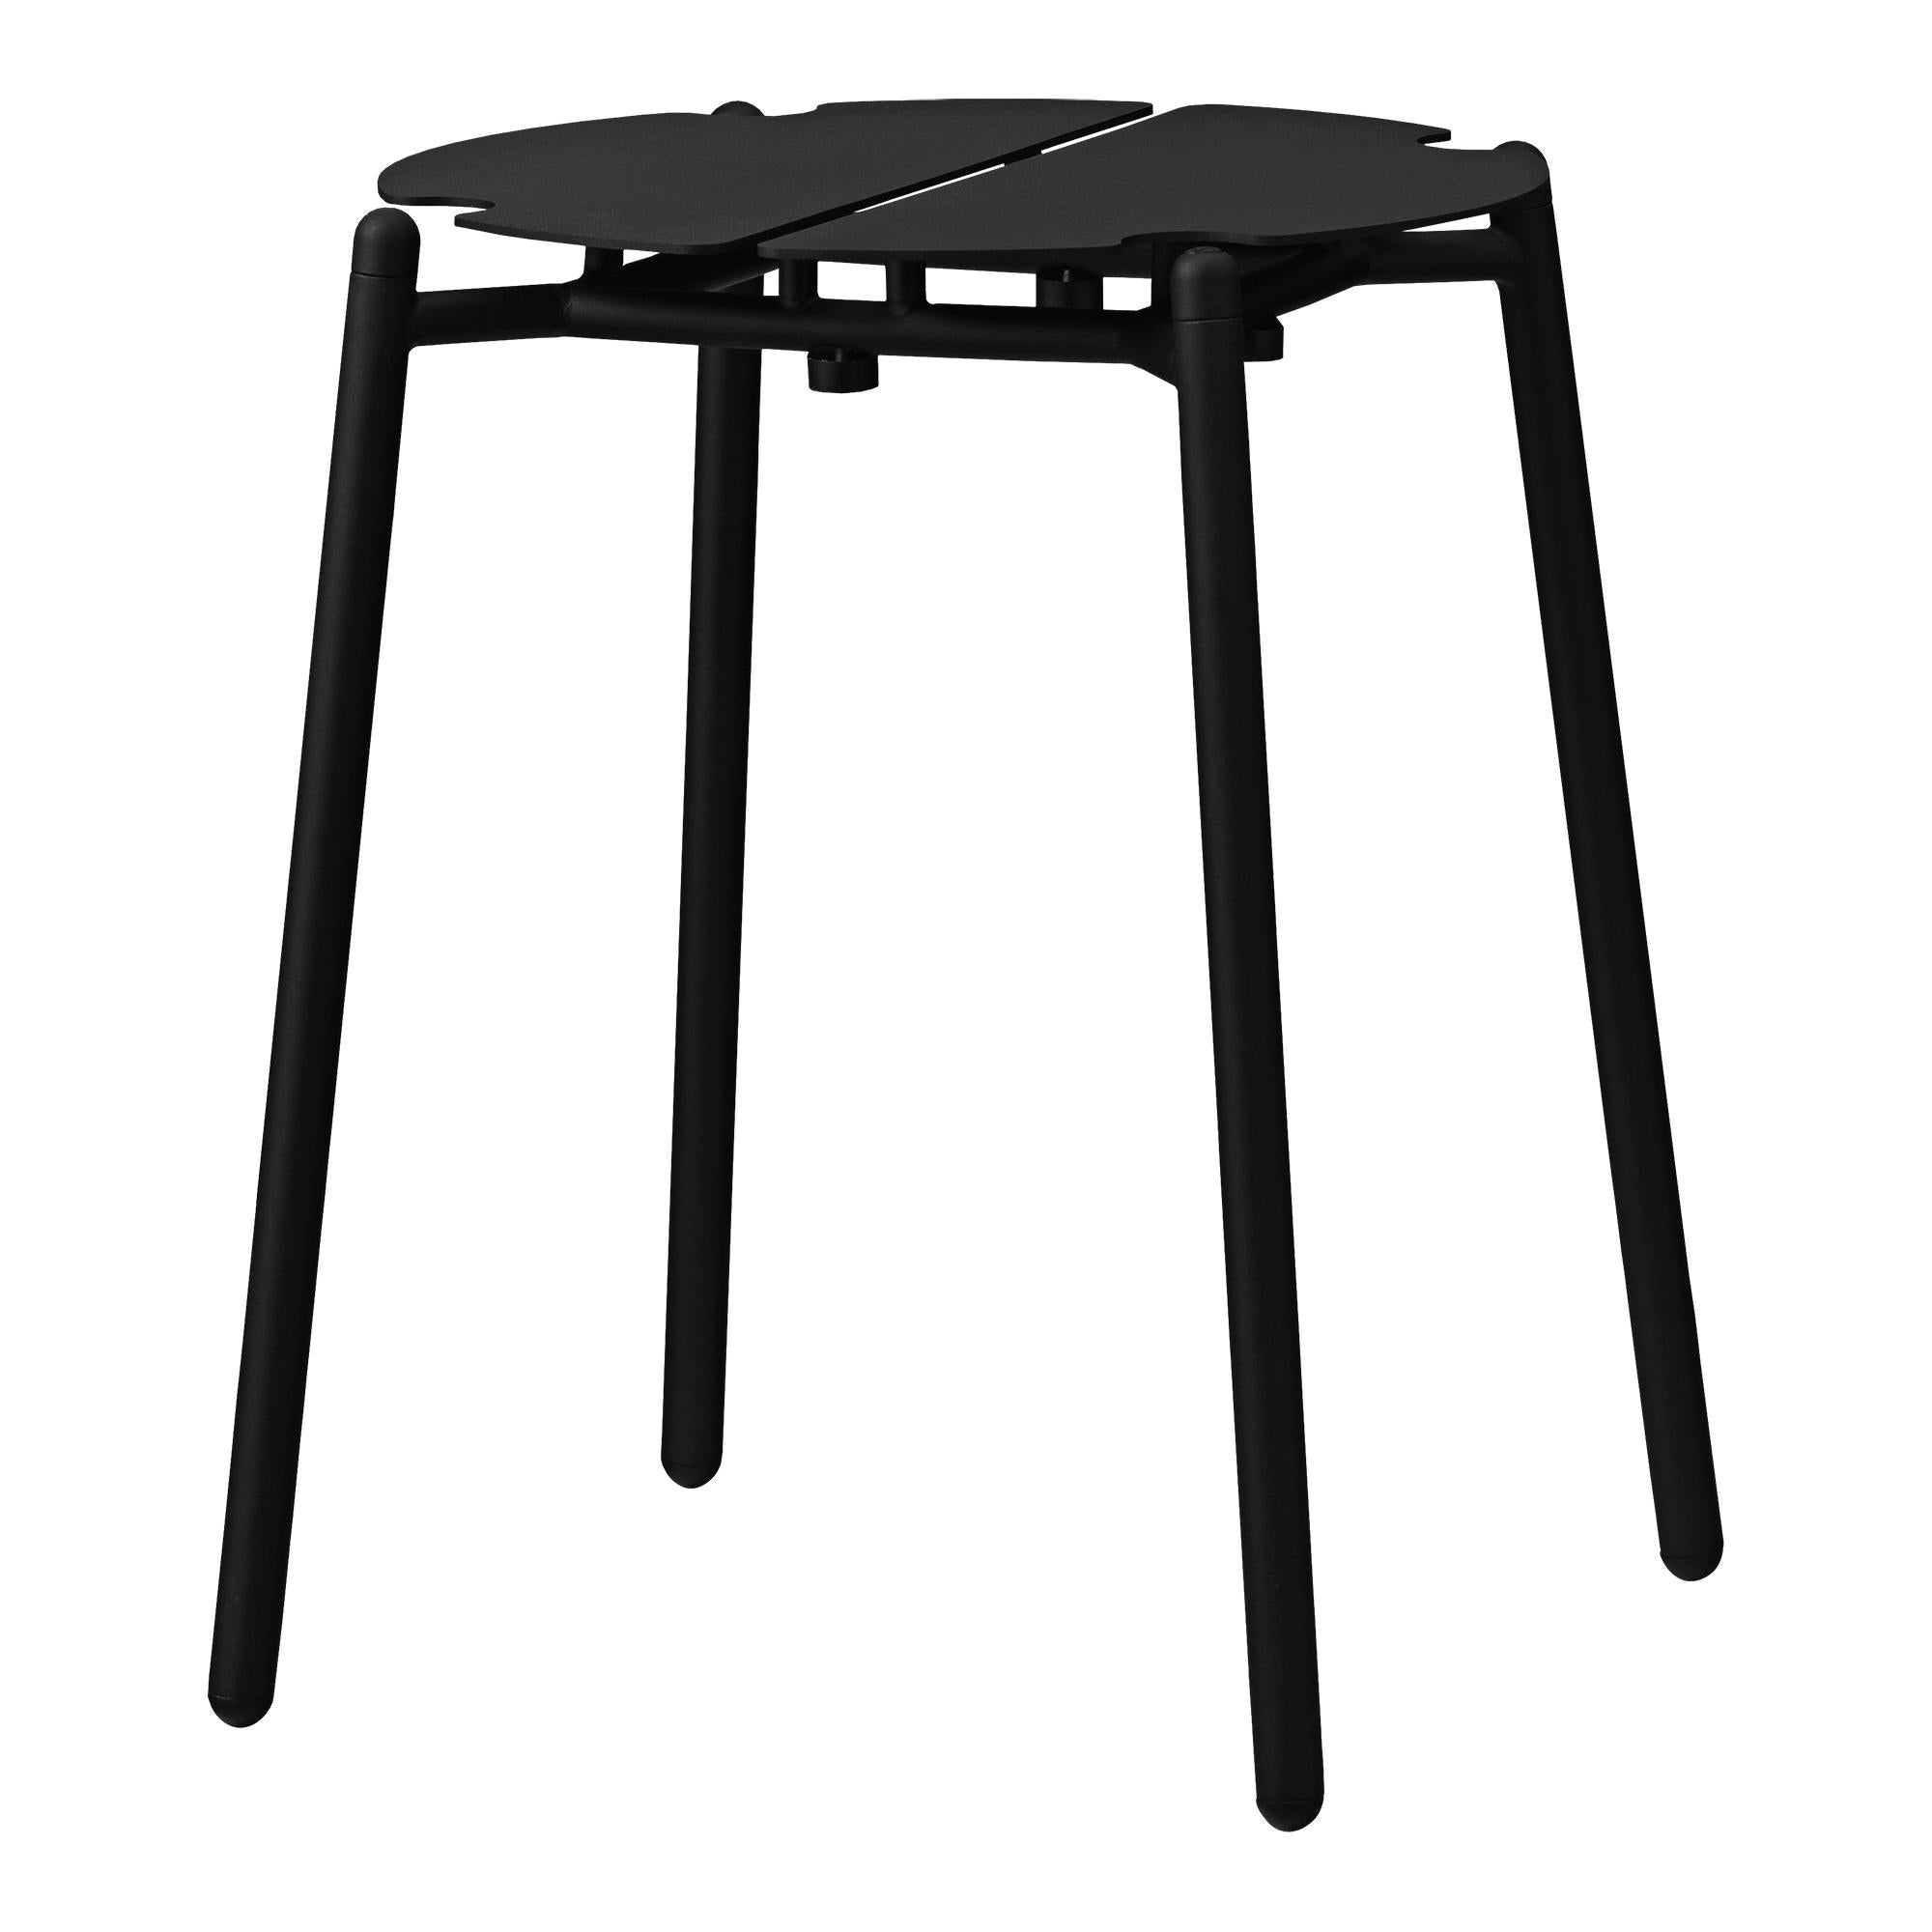 Black minimalist stool 
Dimensions: Diameter 35 x H 45 cm 
Materials: Steel w. Matte Powder Coating & Aluminum w. Matte Powder Coating.
Available in colors: Taupe, Bordeaux, Forest, Ginger Bread, Black and, Black and Gold.


The NOVO stools